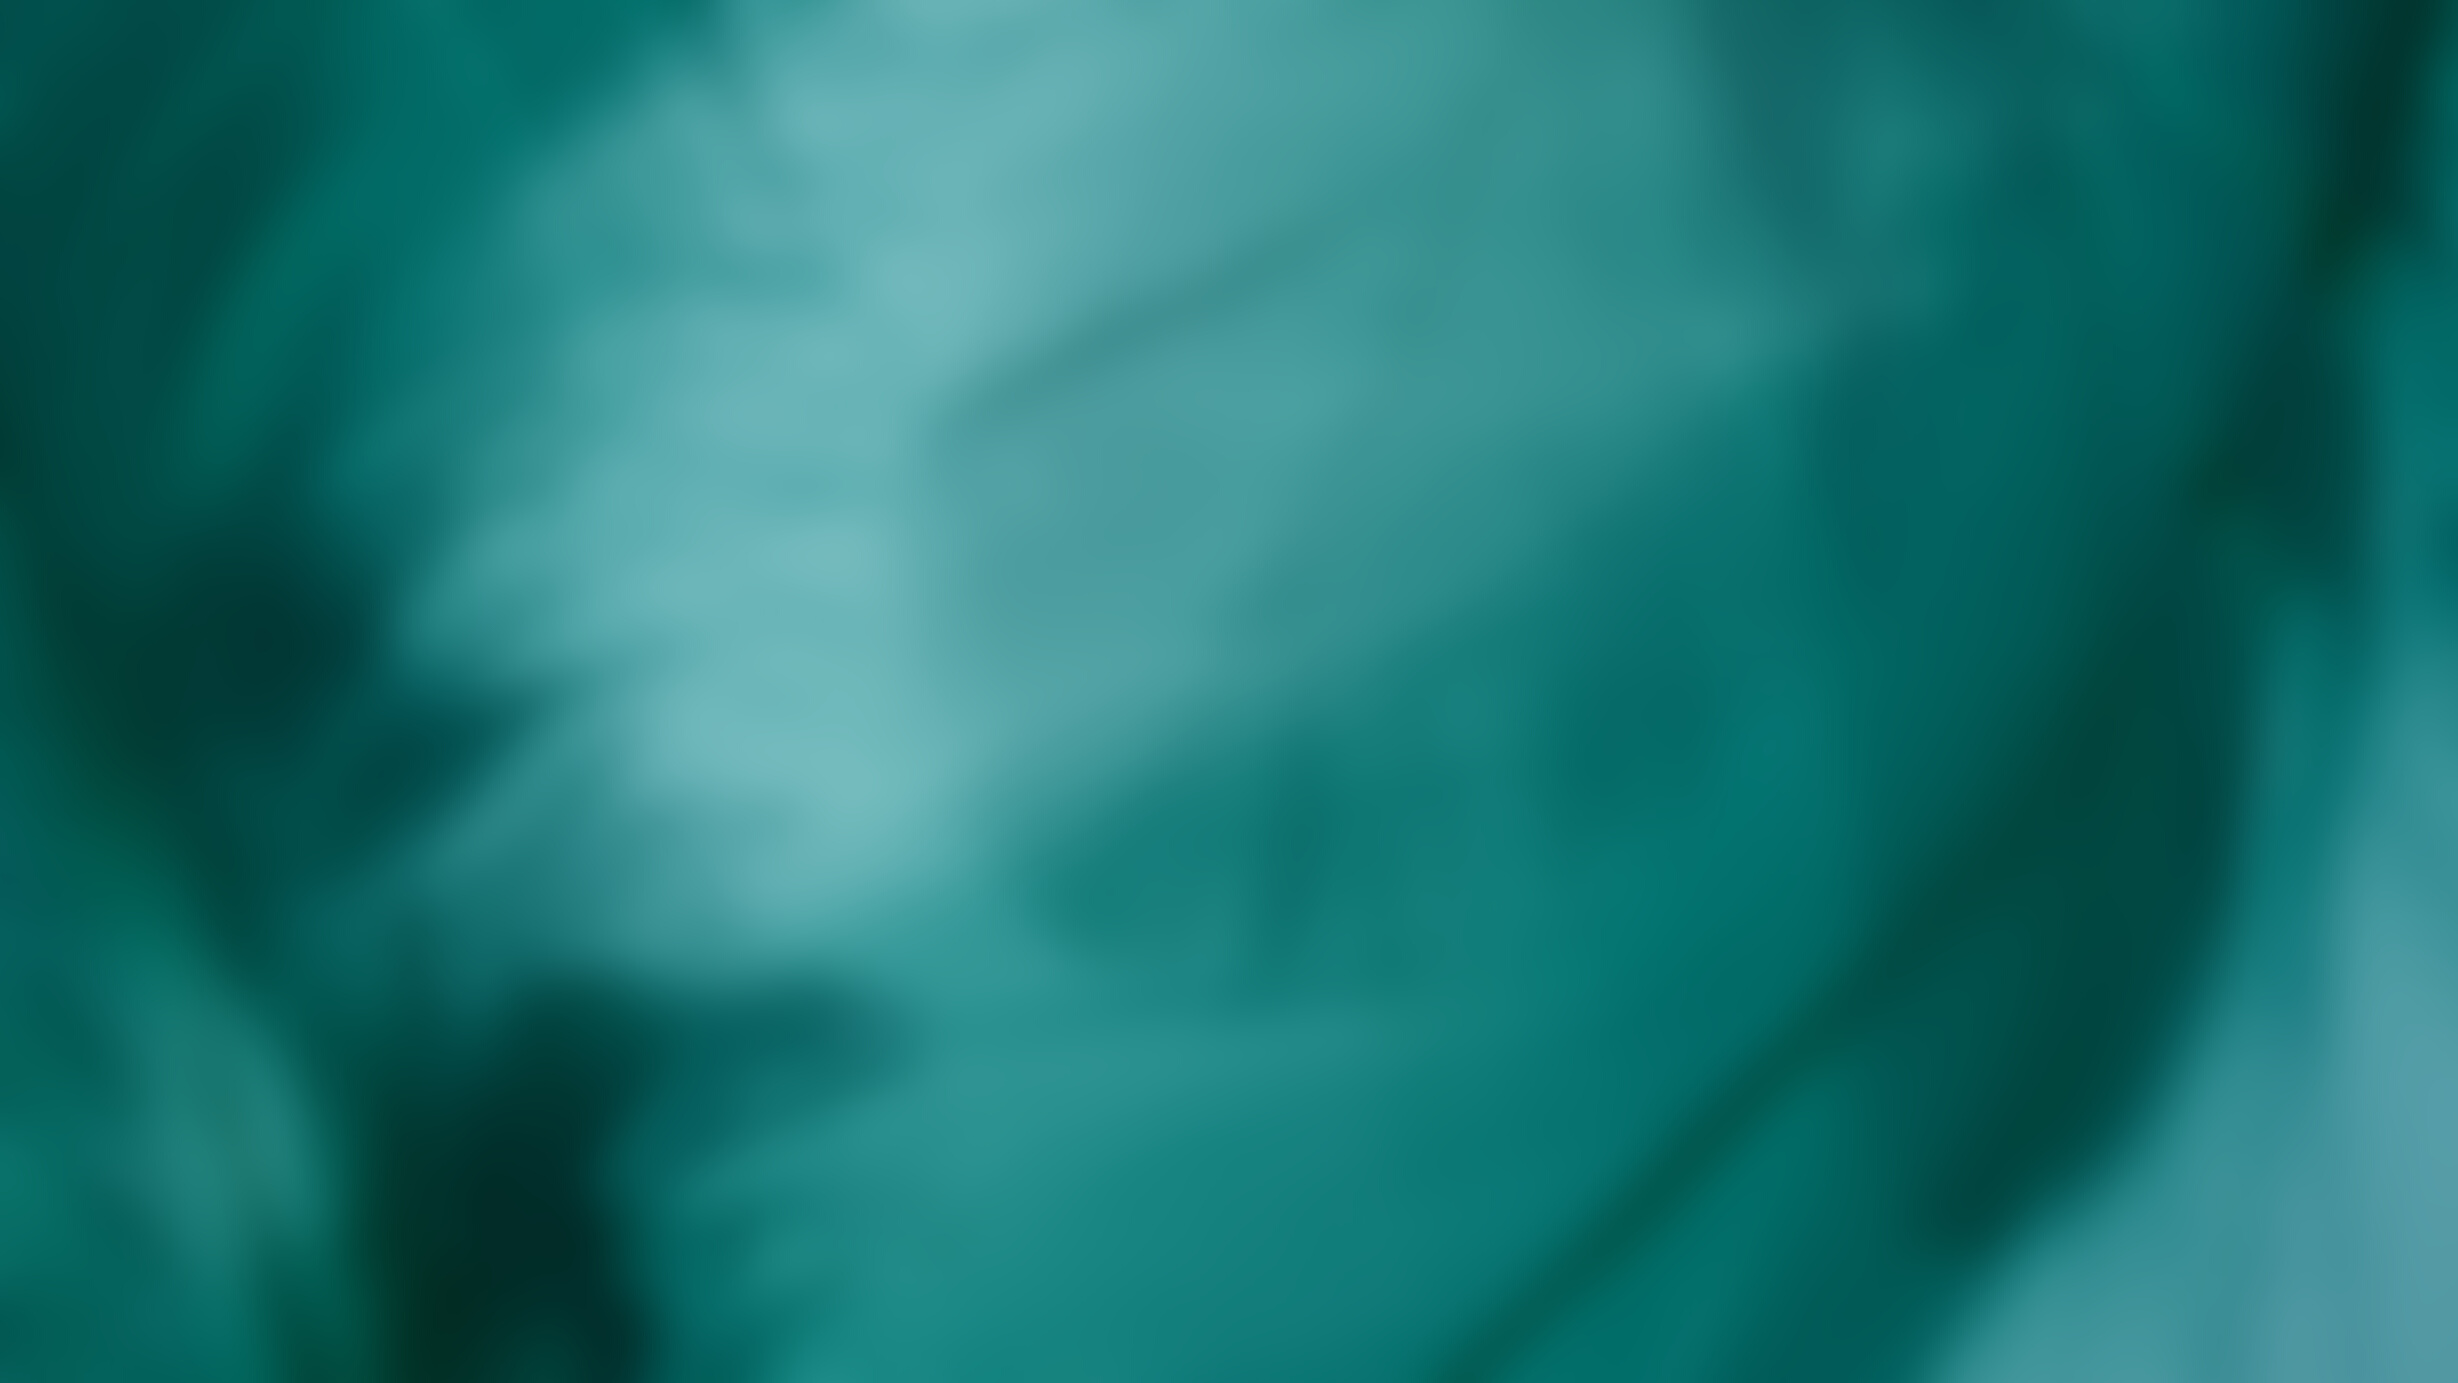 Close-up Shot of Feathers on a Teal Background